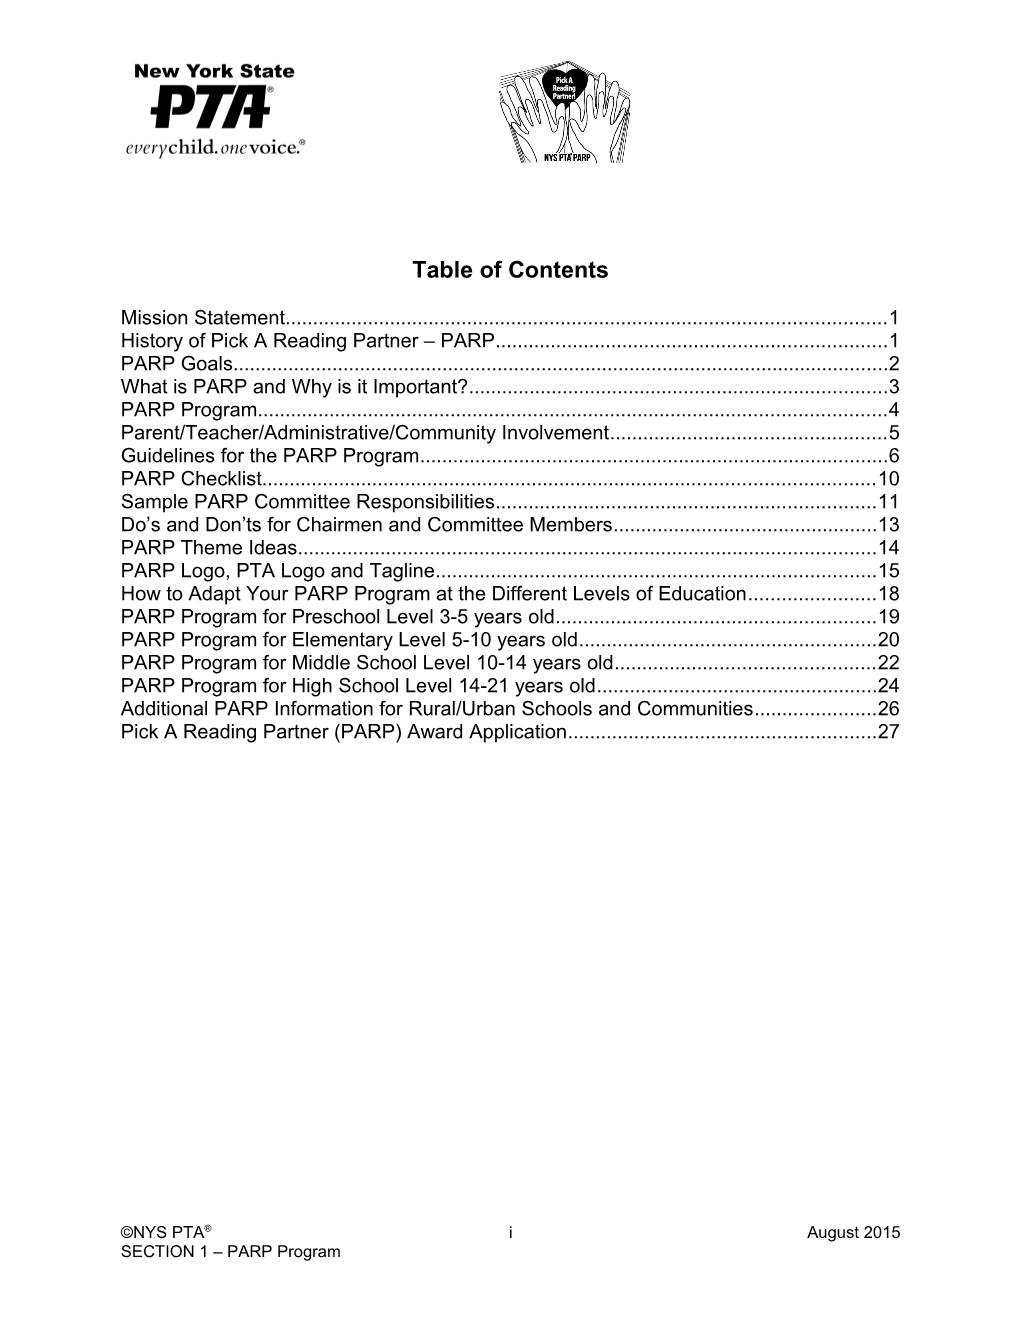 Table of Contents s33